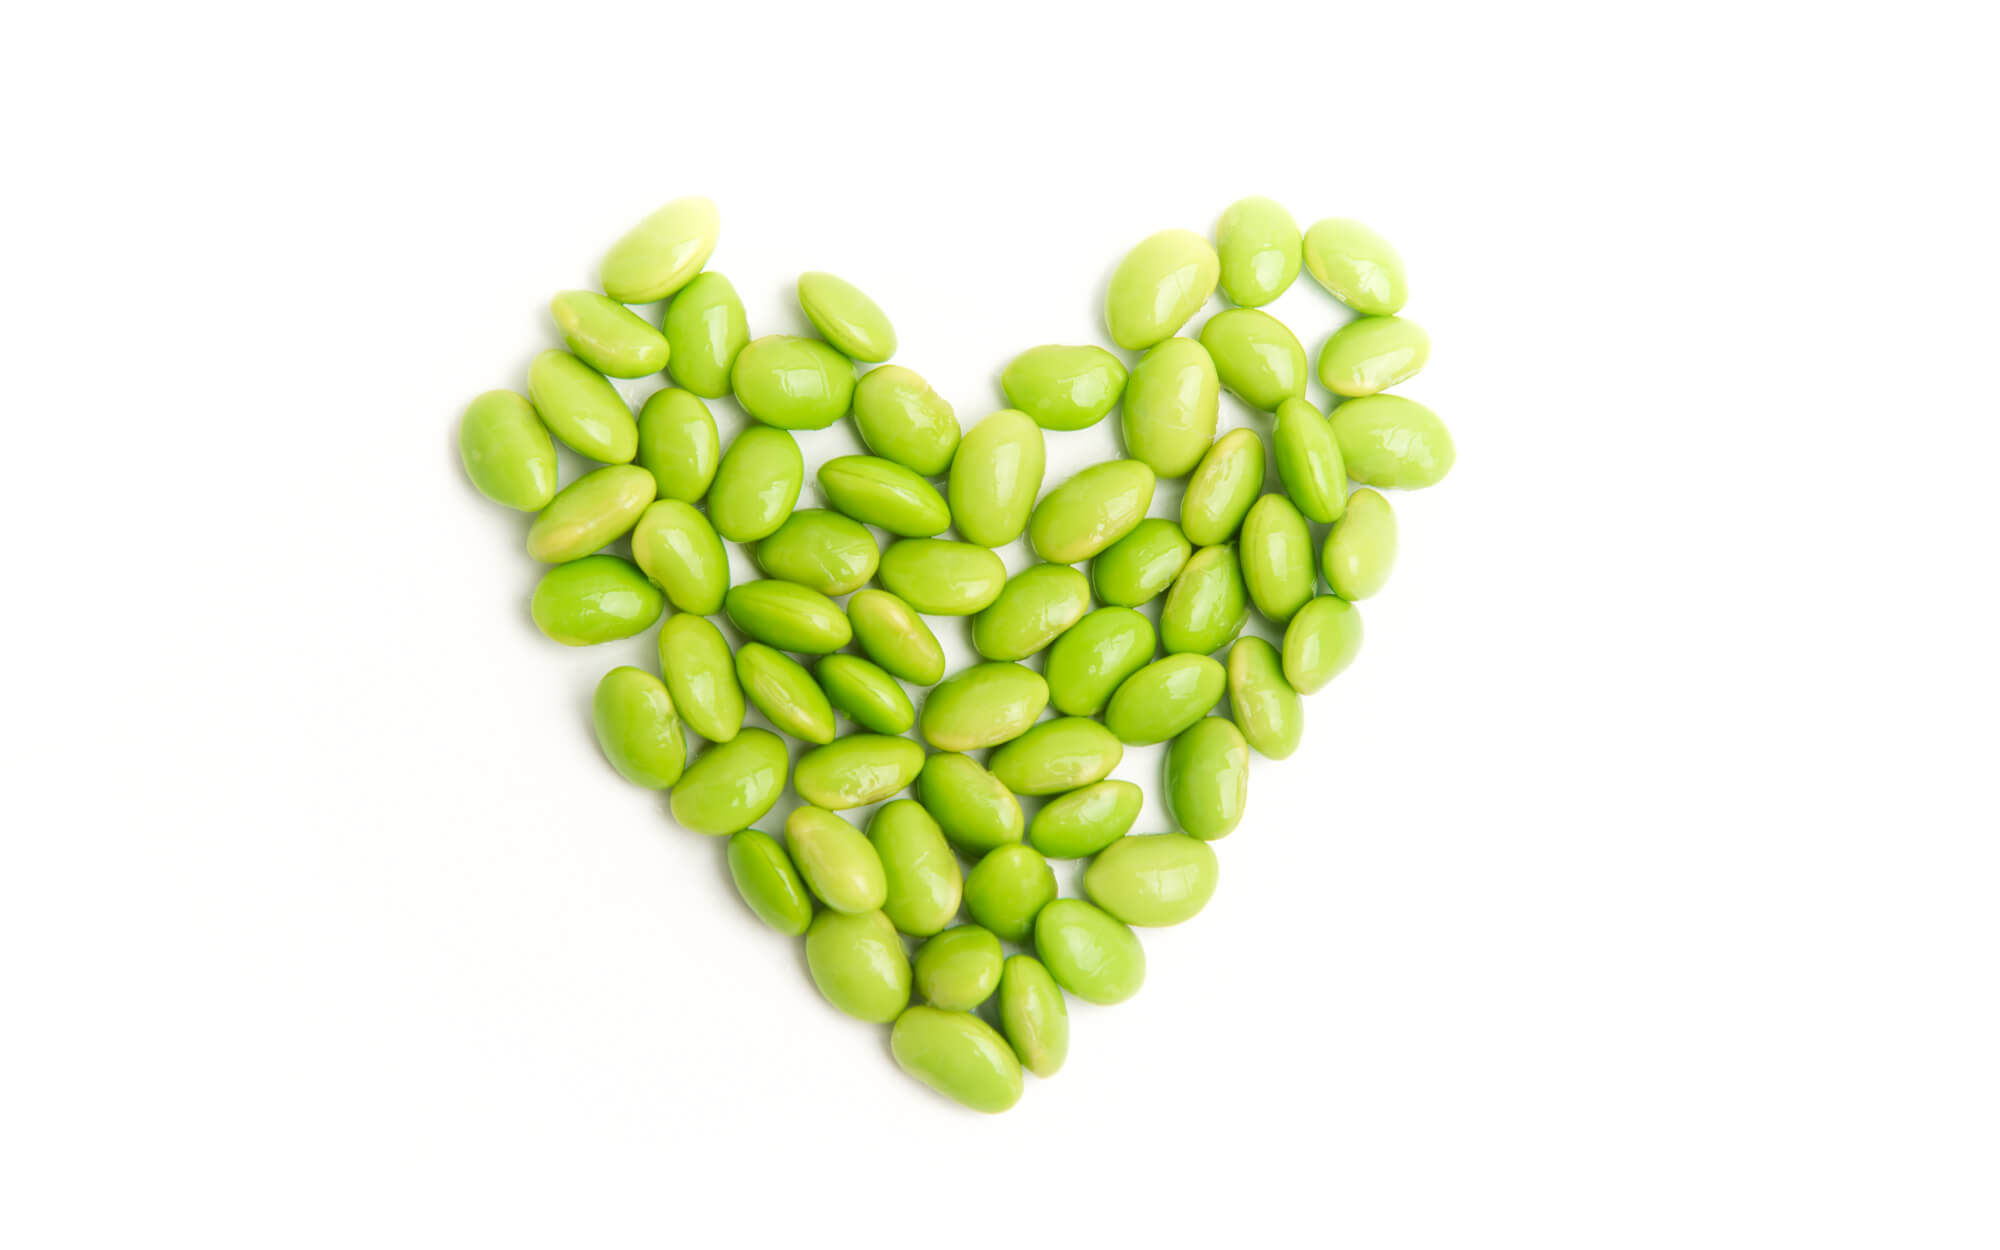 soy health benefits include heart health